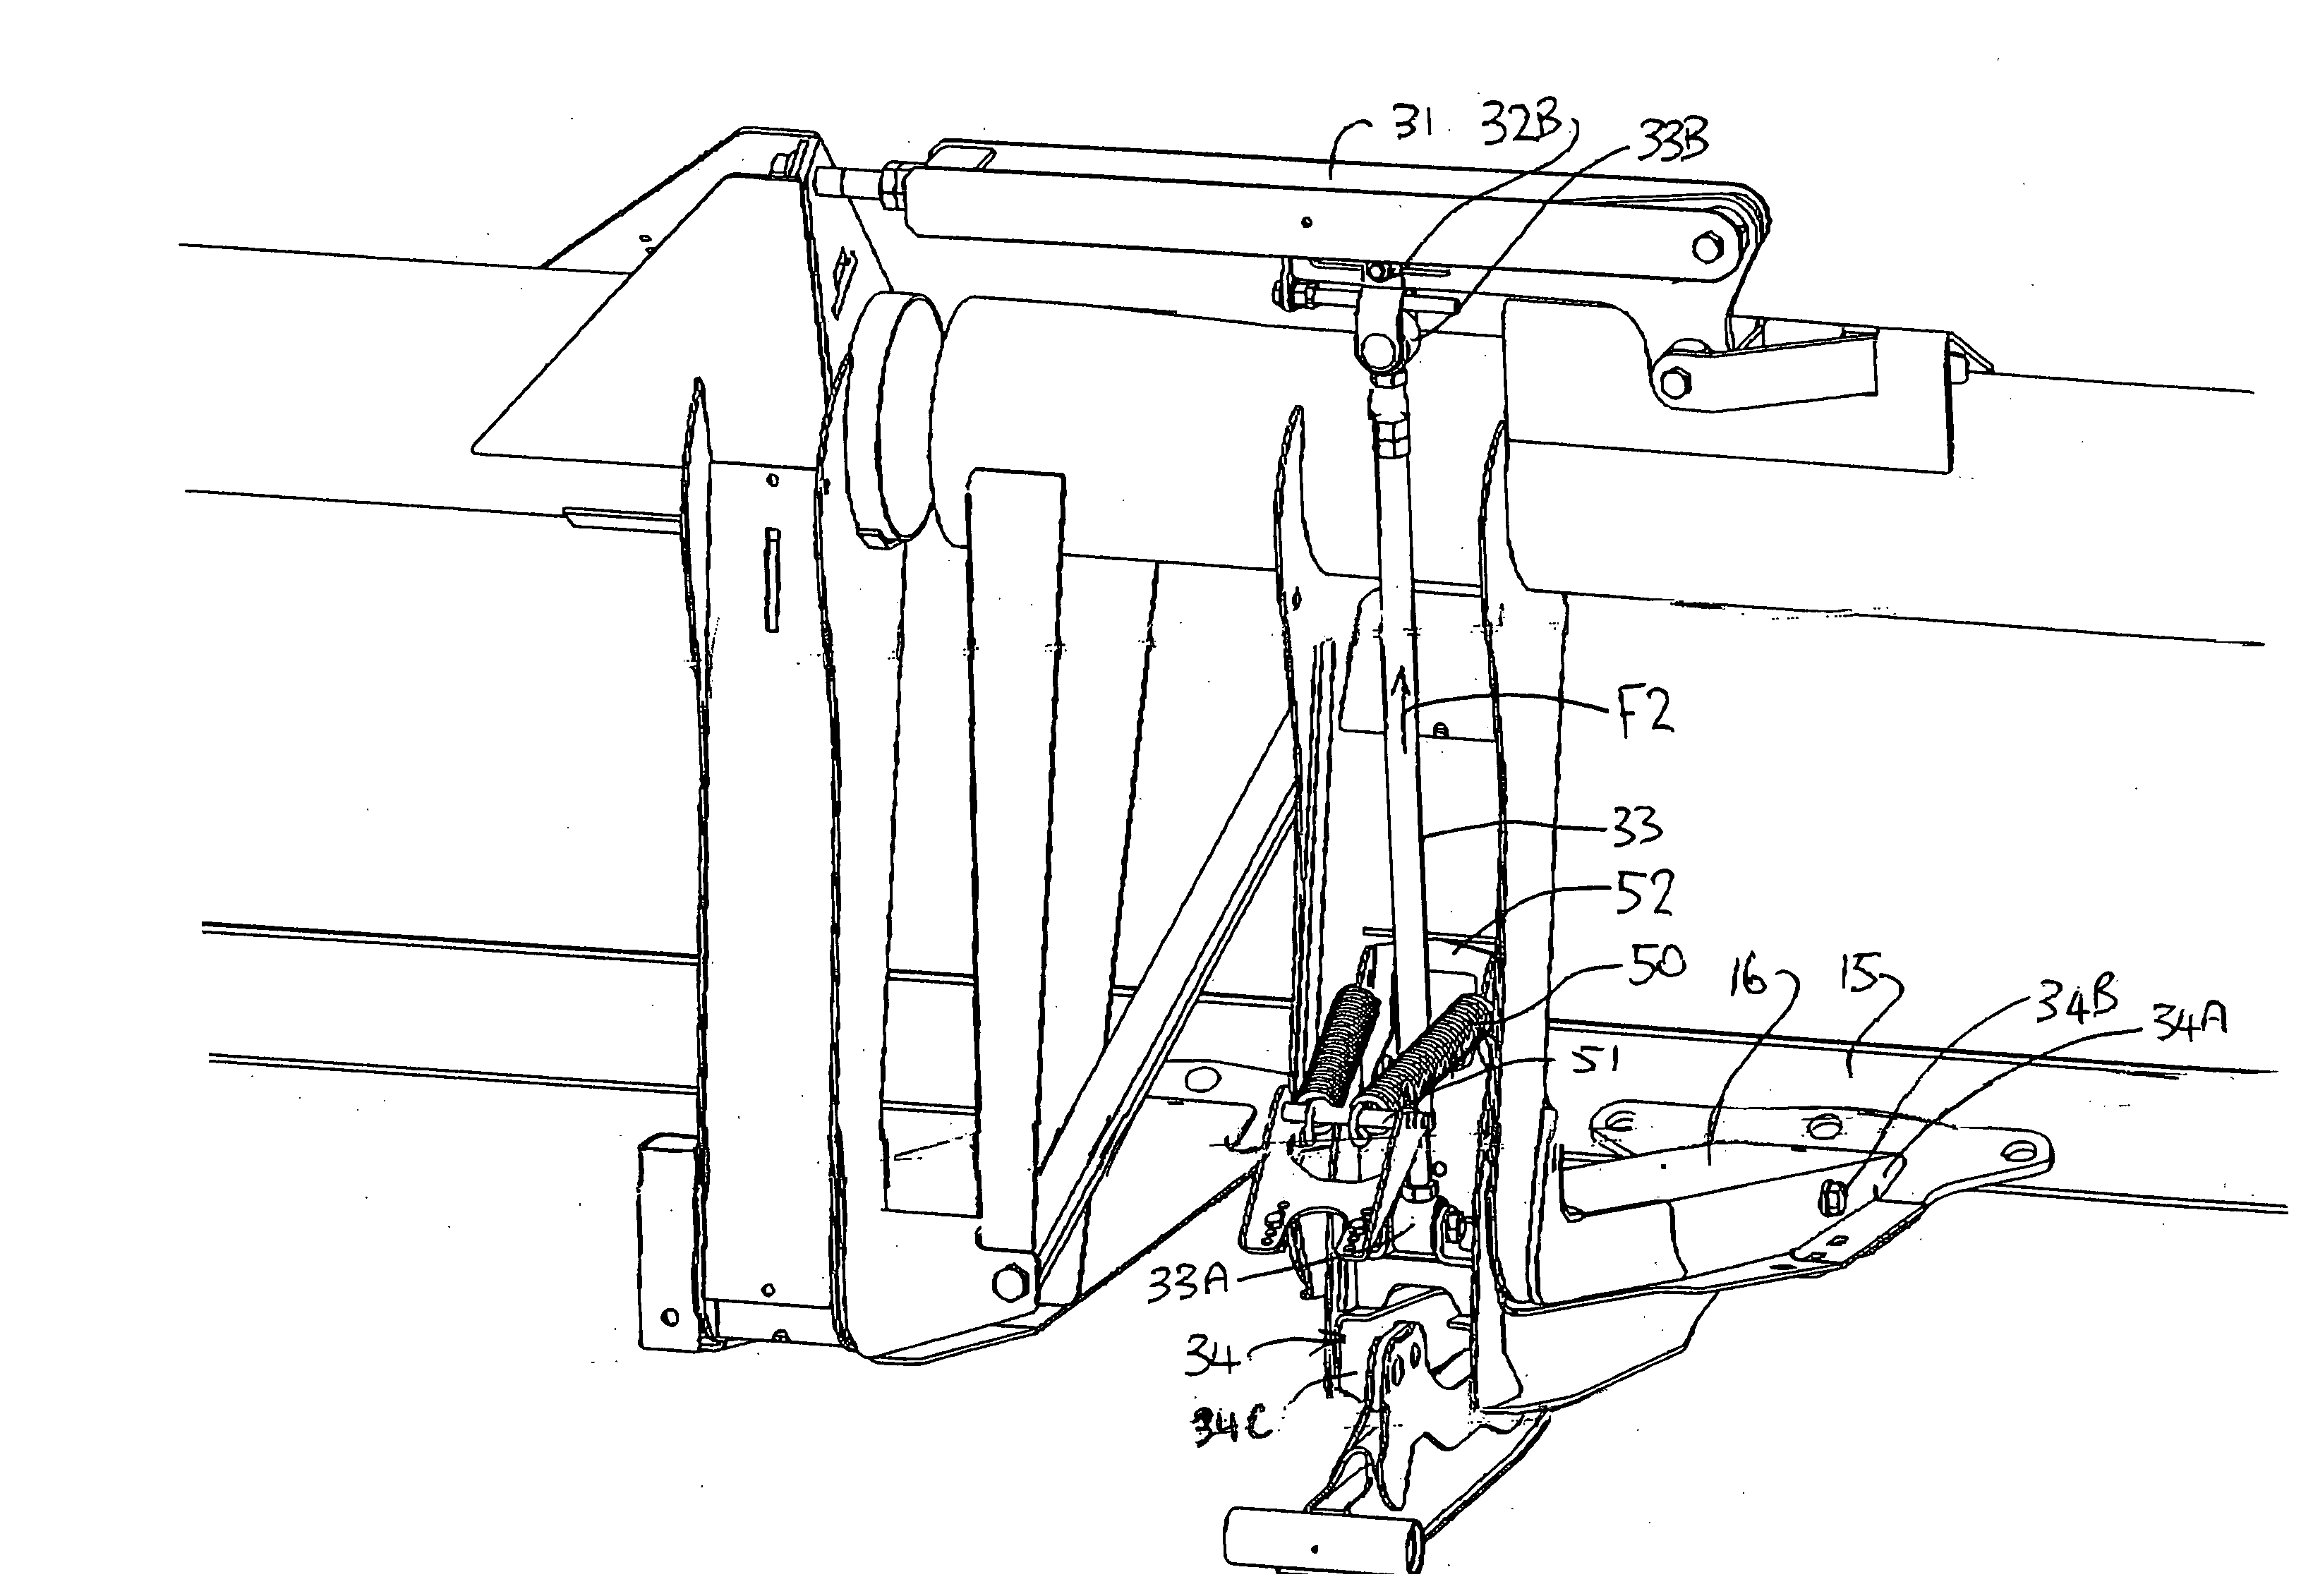 Device for maintaining wing balance on a multi-section header